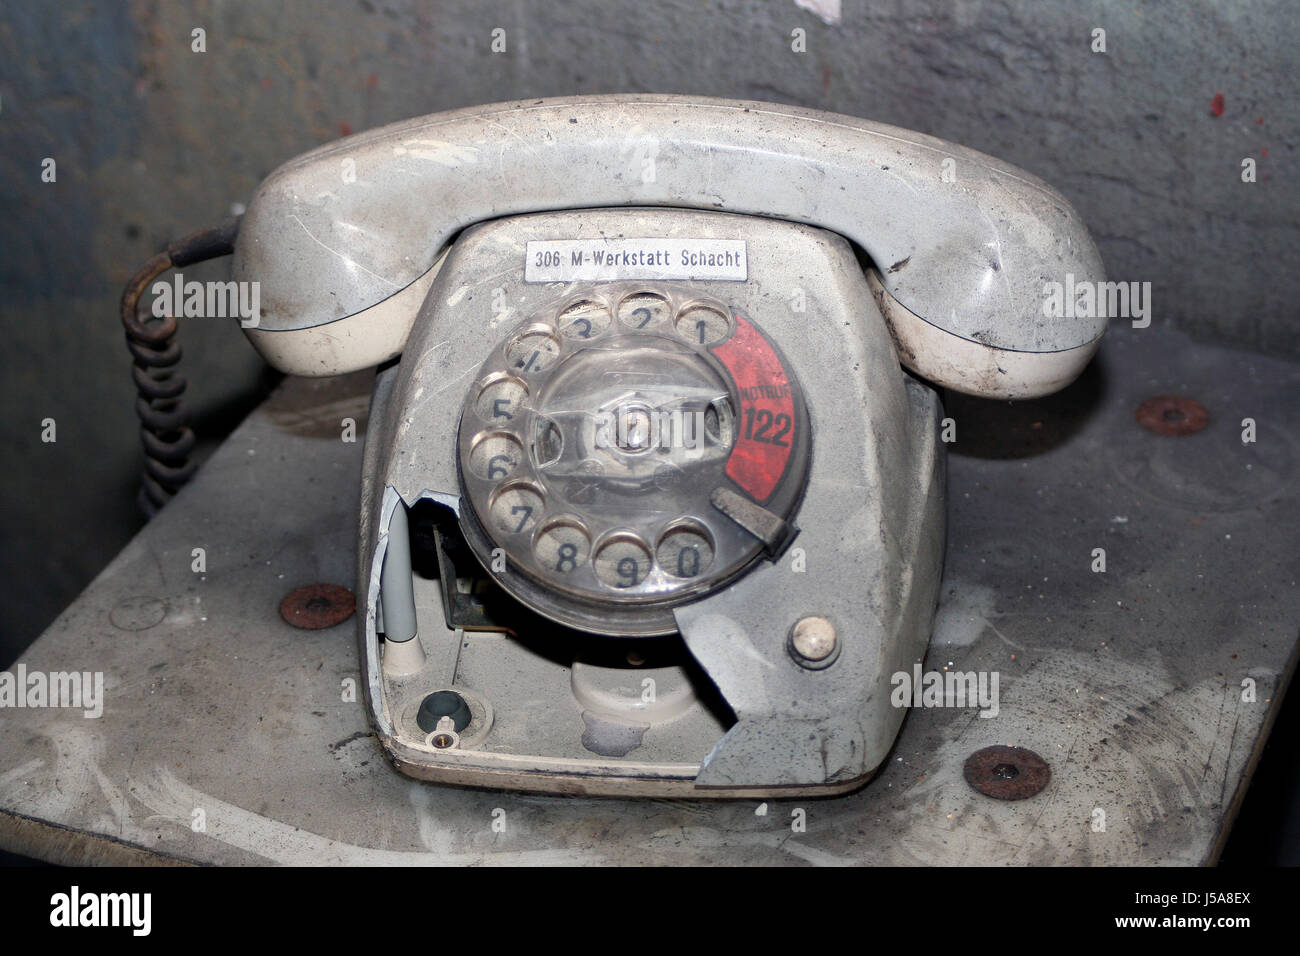 telephone phone engineering defect remote communication Ruhr district district Stock Photo